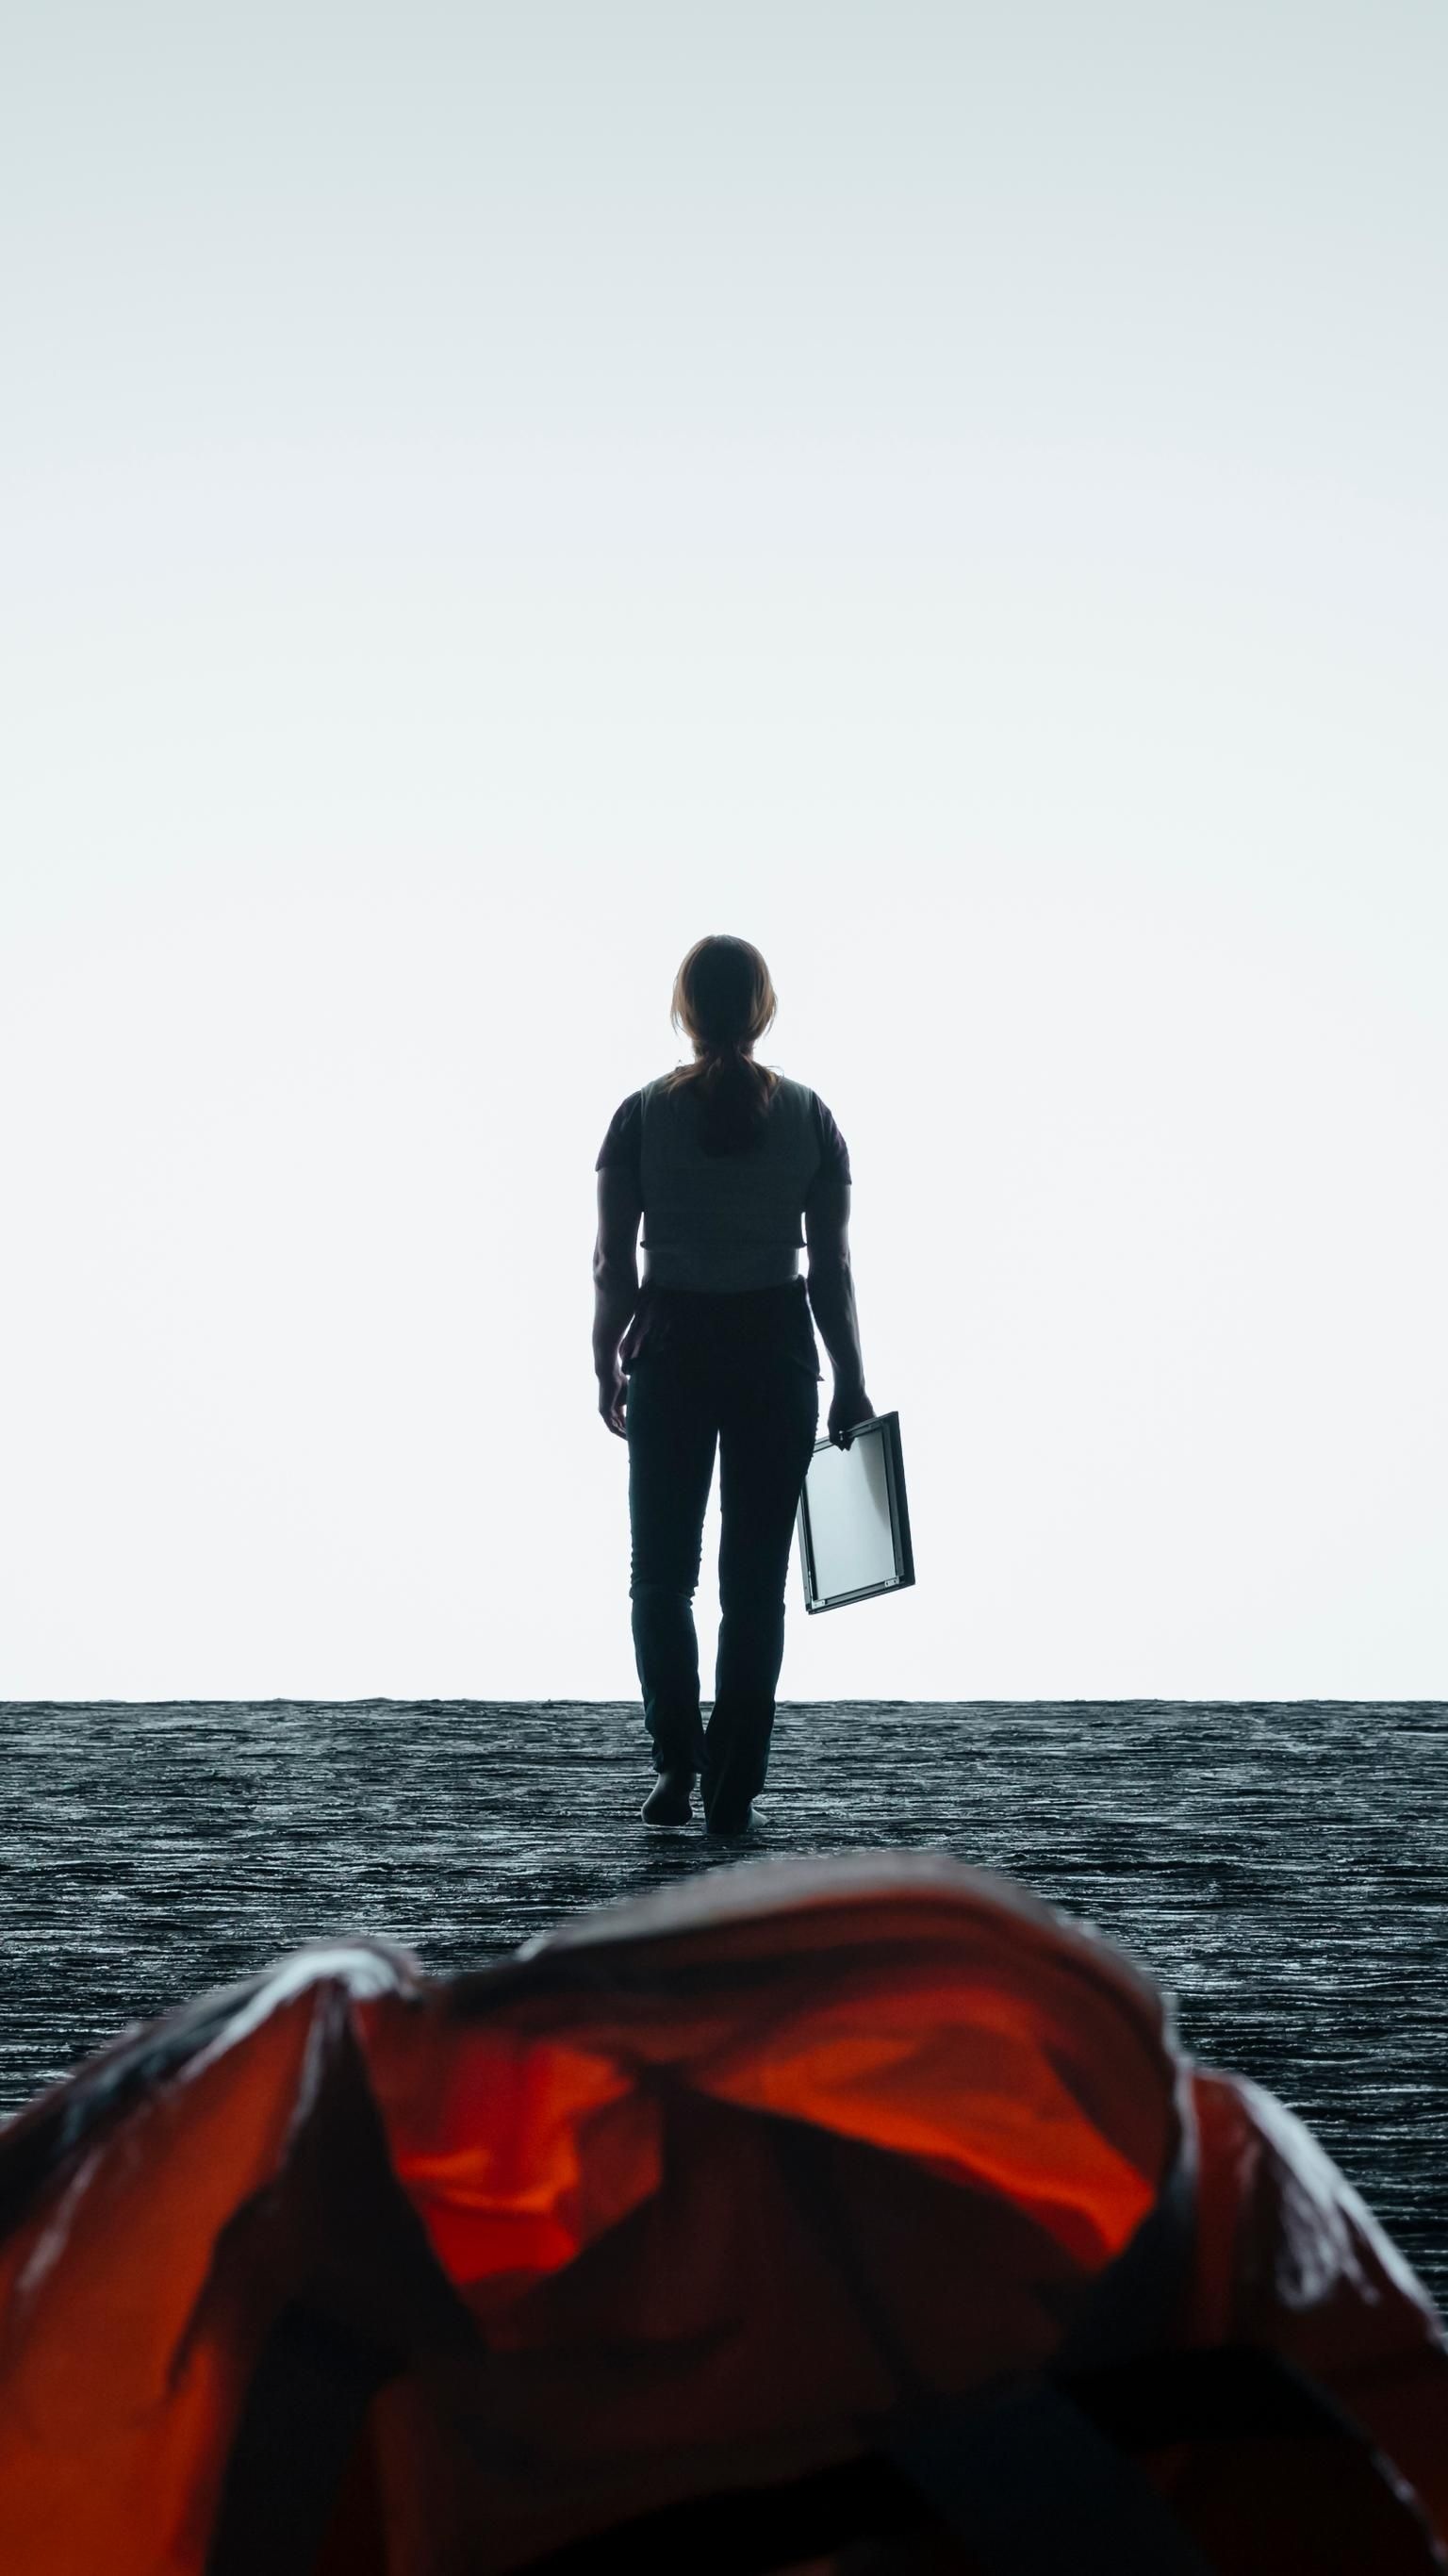 Arrival (Movie): The film explores communication with an extraterrestrial intelligence and is based on Story of Your Life, the 1998 short story by Ted Chiang. 1540x2740 HD Background.